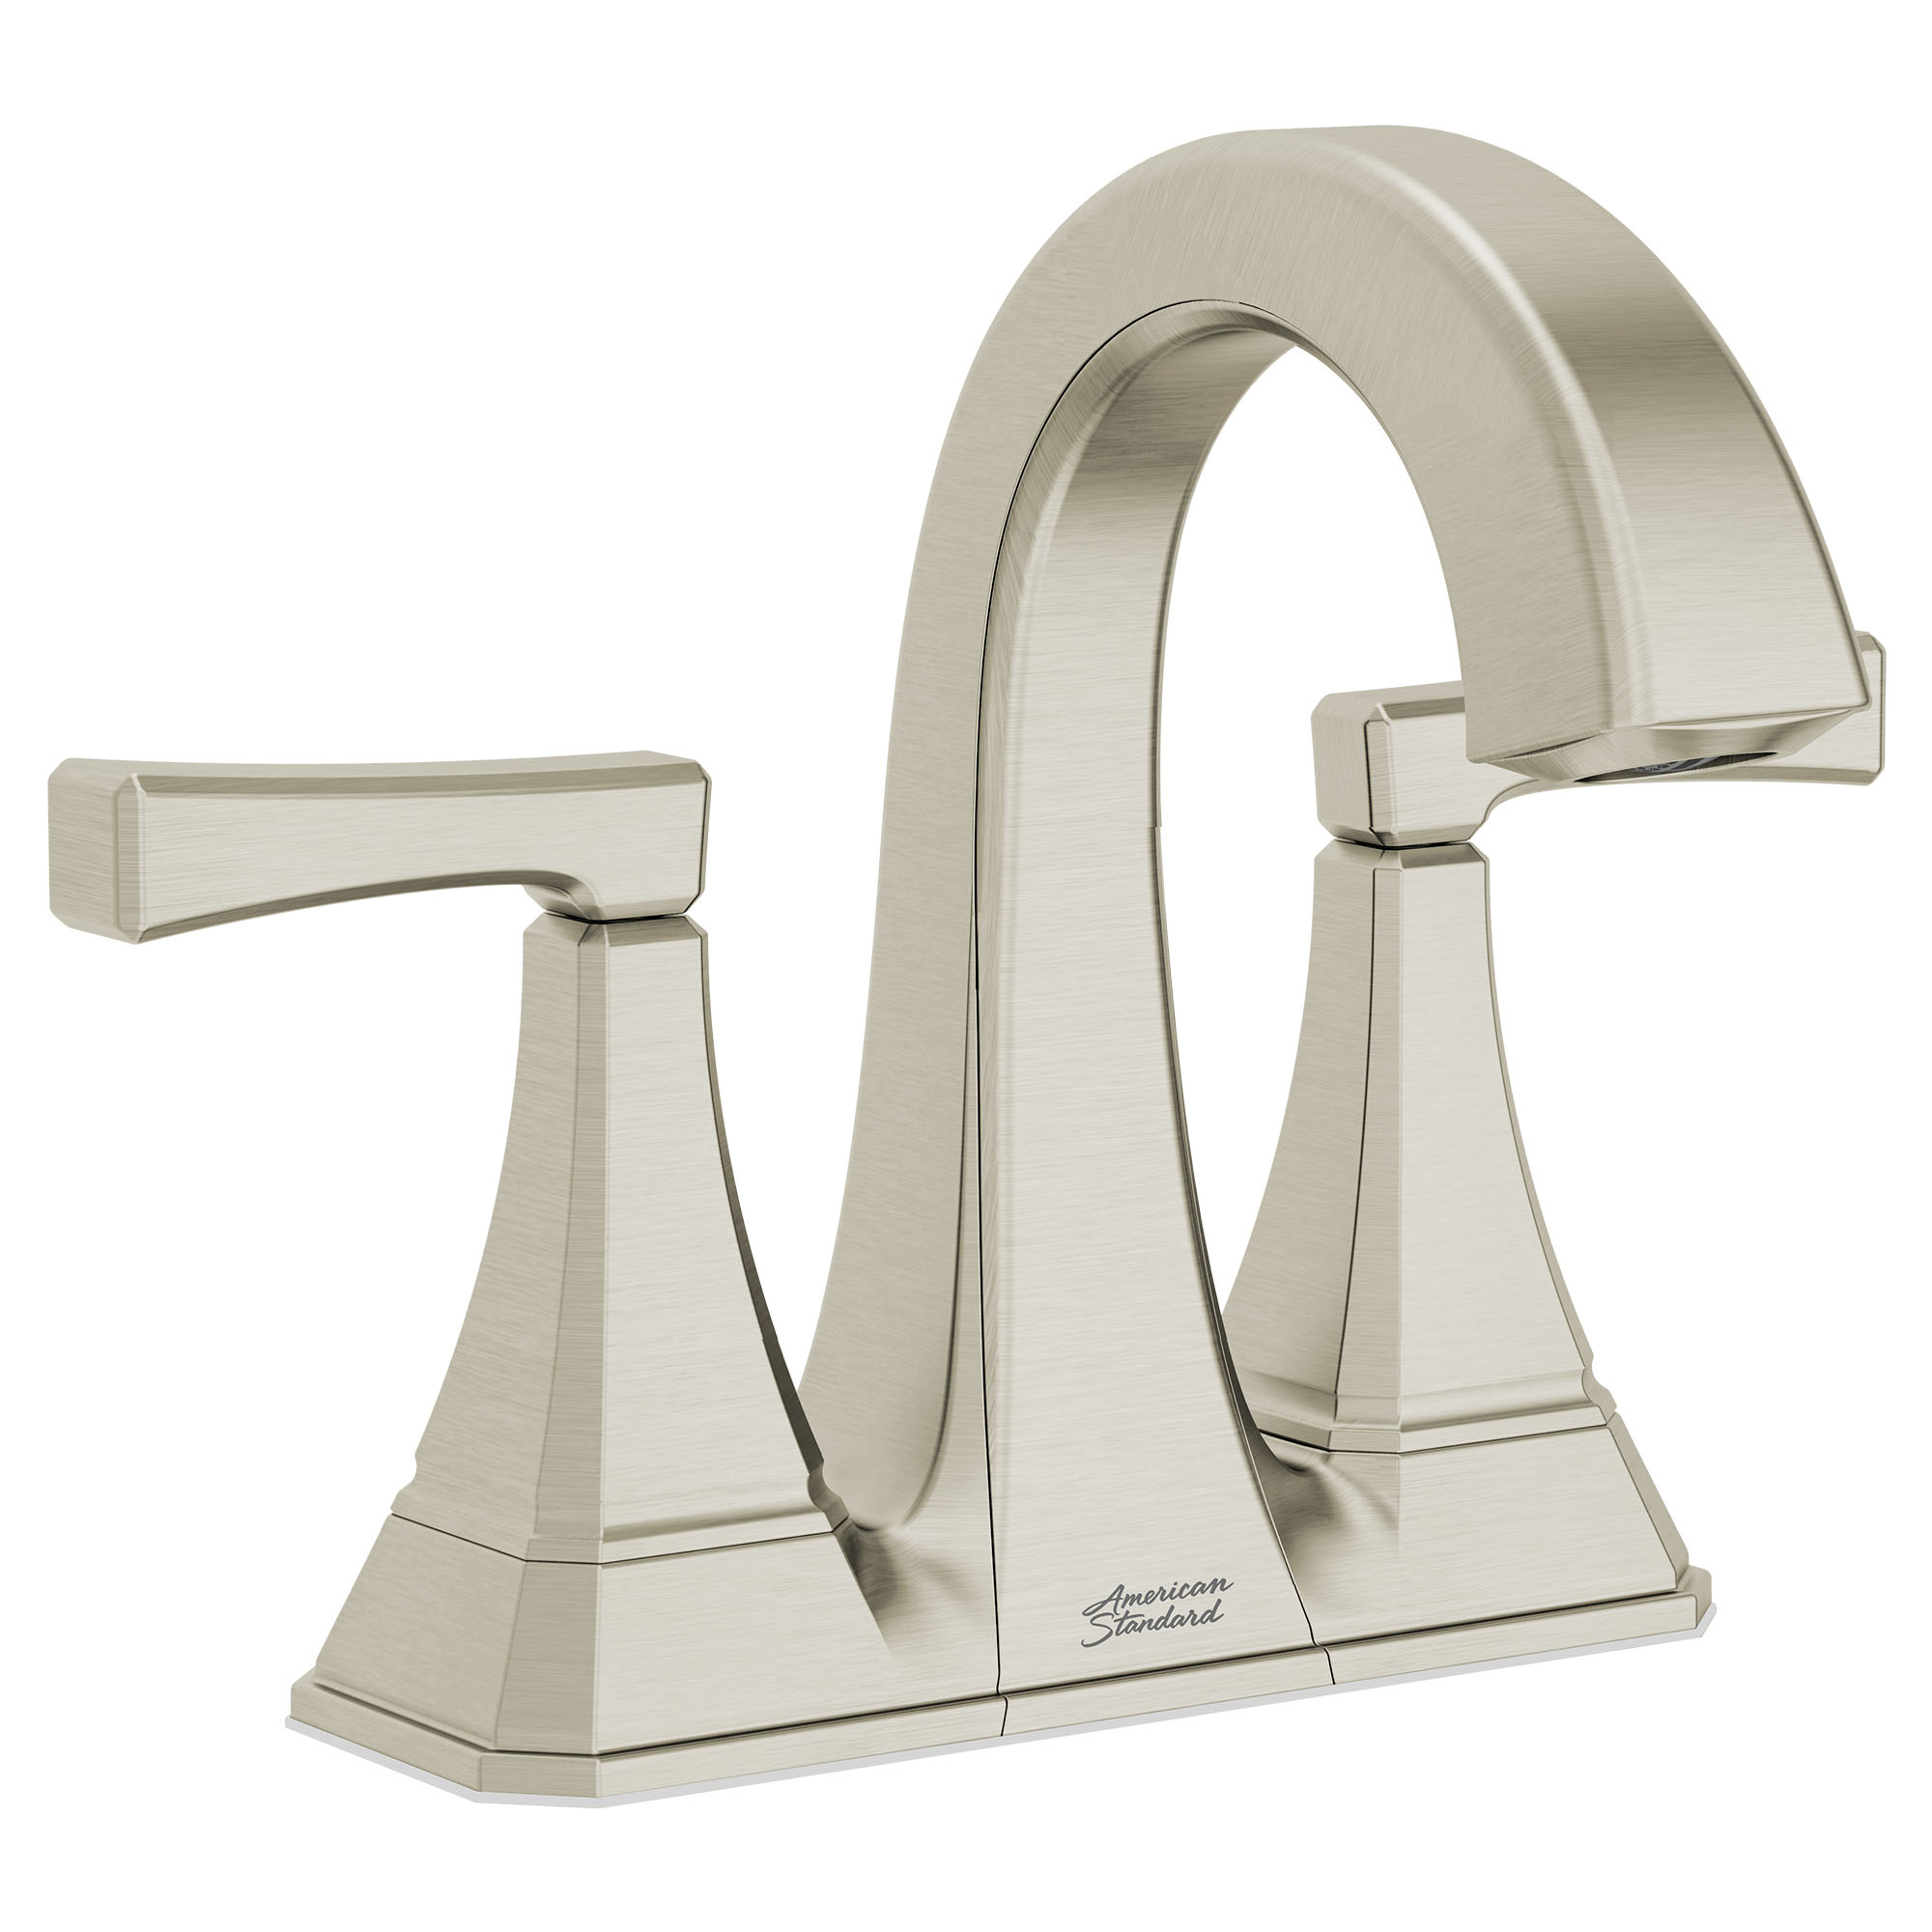 Crawford™ 4-Inch Centerset 2-Handle Bathroom Faucet 1.2 gpm/4.5 L/min With Lever Handles